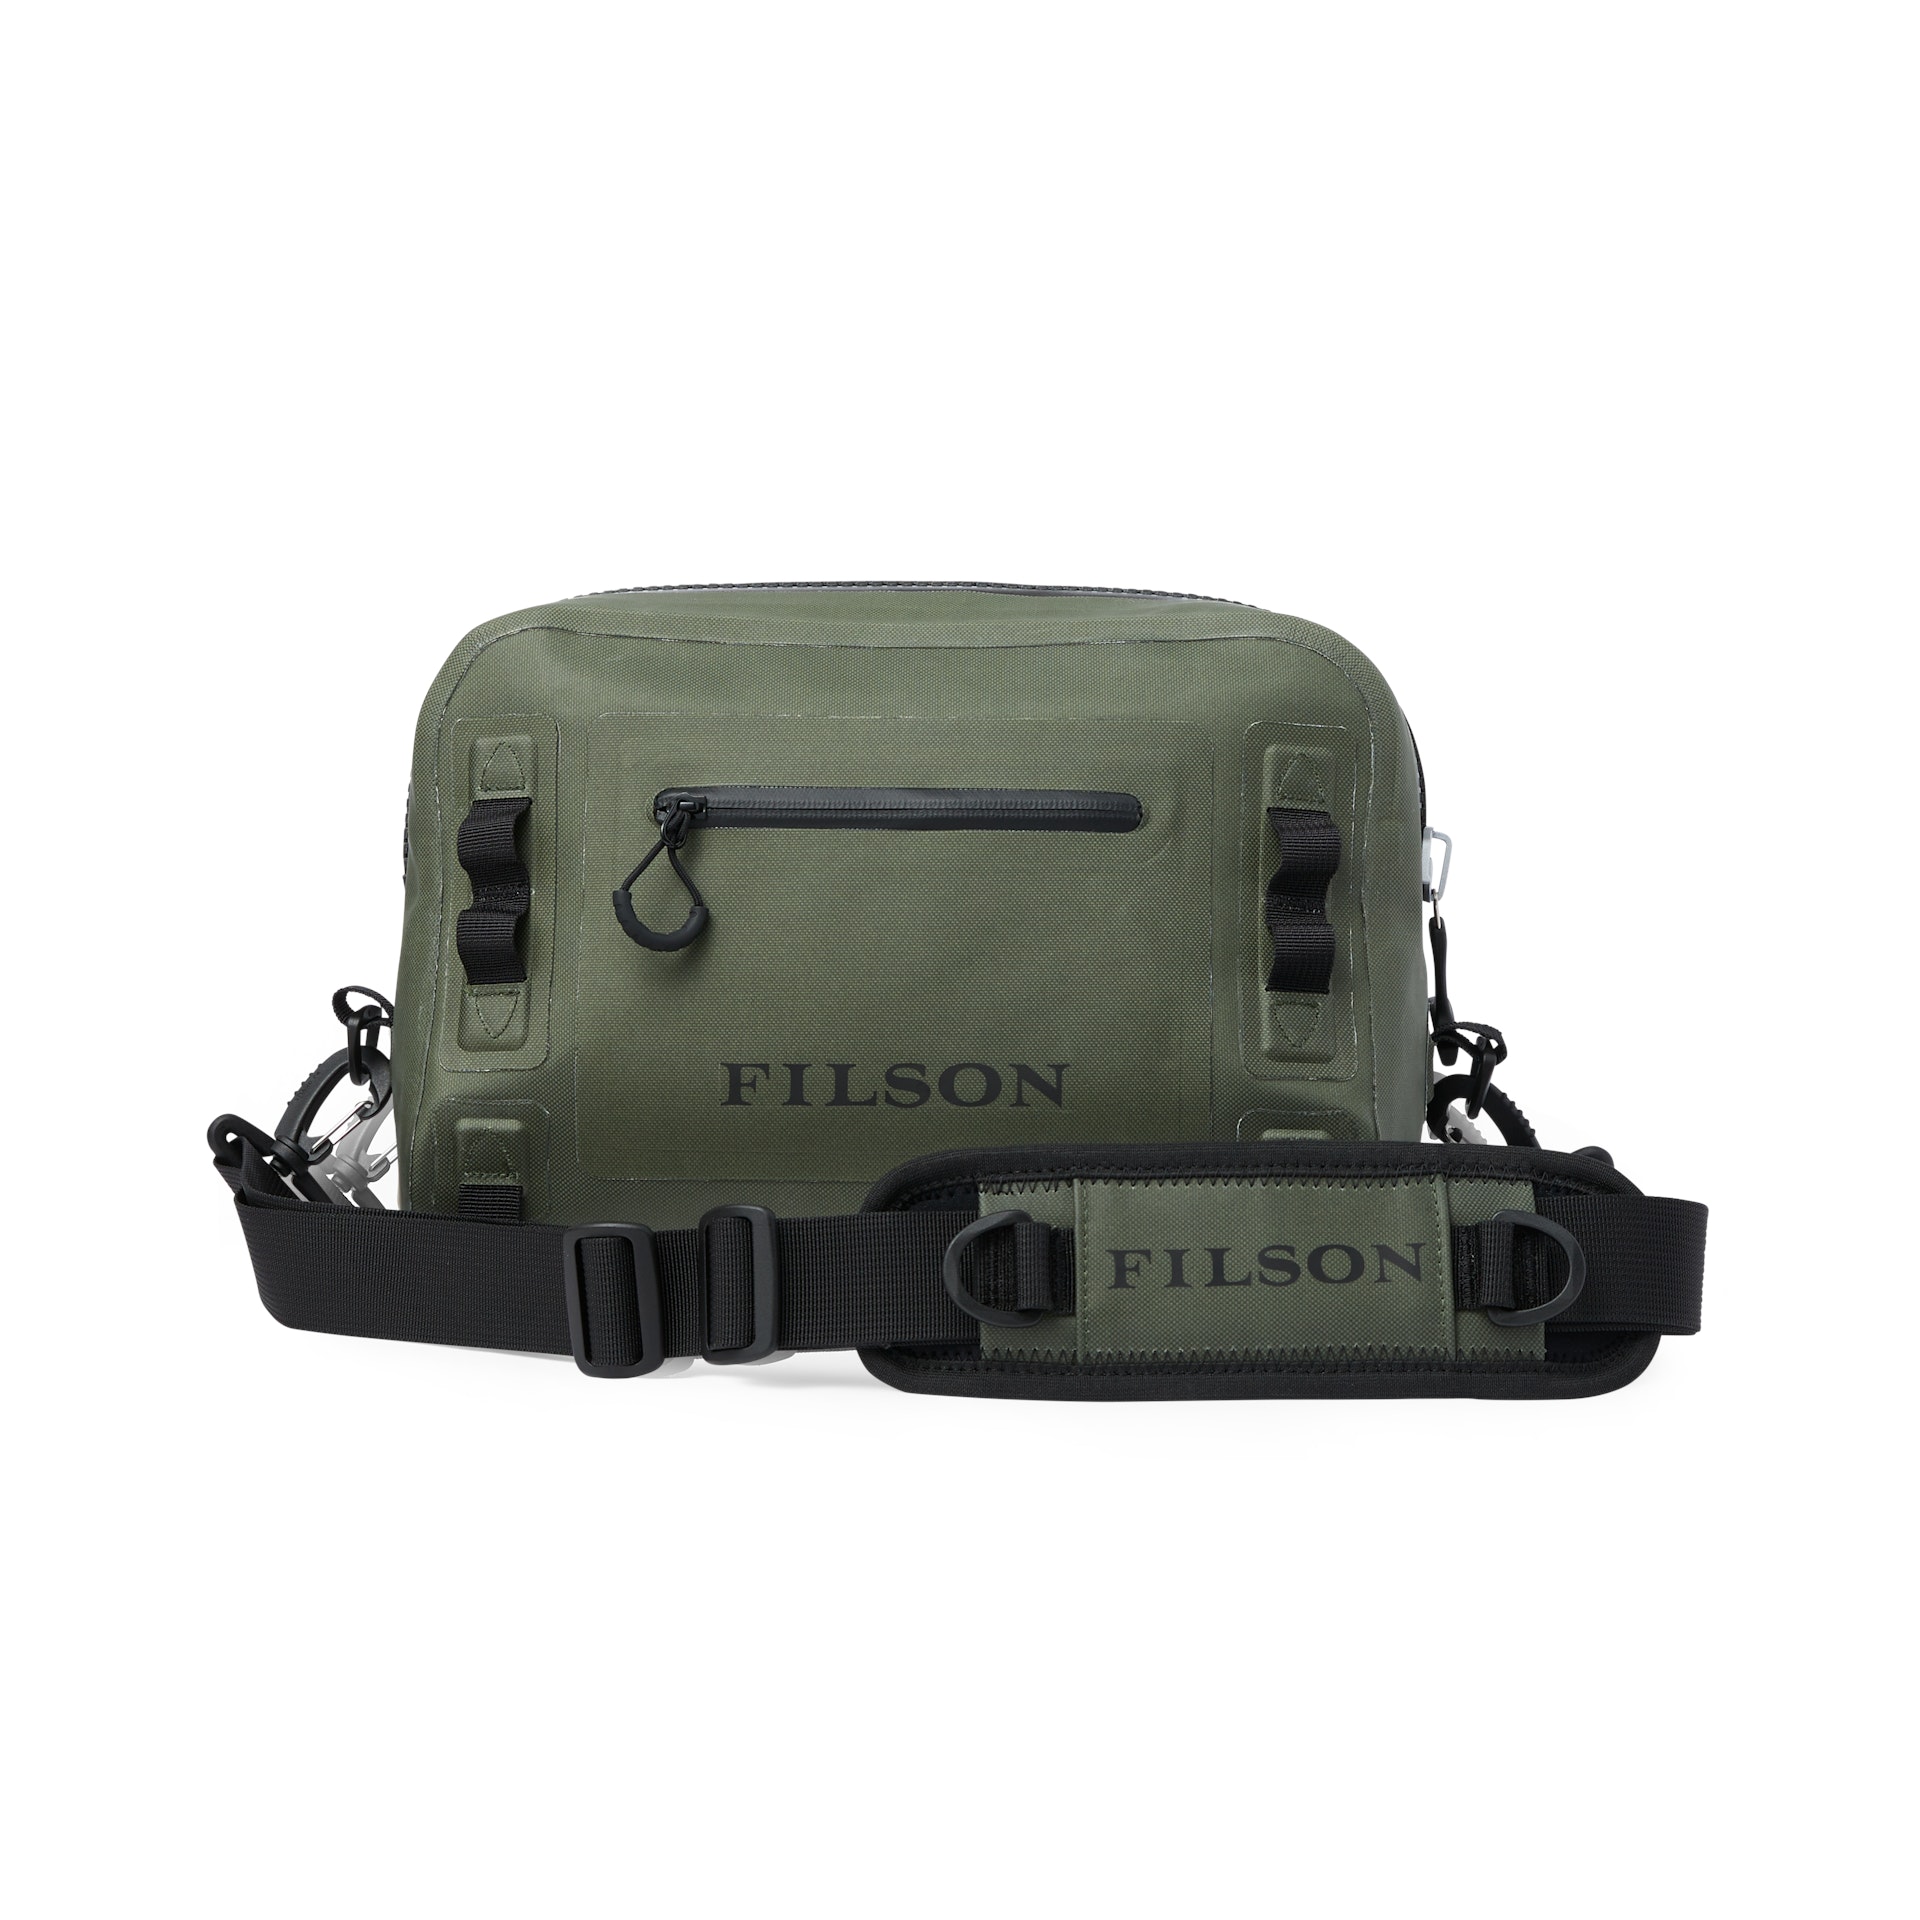 fish sling bag, fish sling bag Suppliers and Manufacturers at